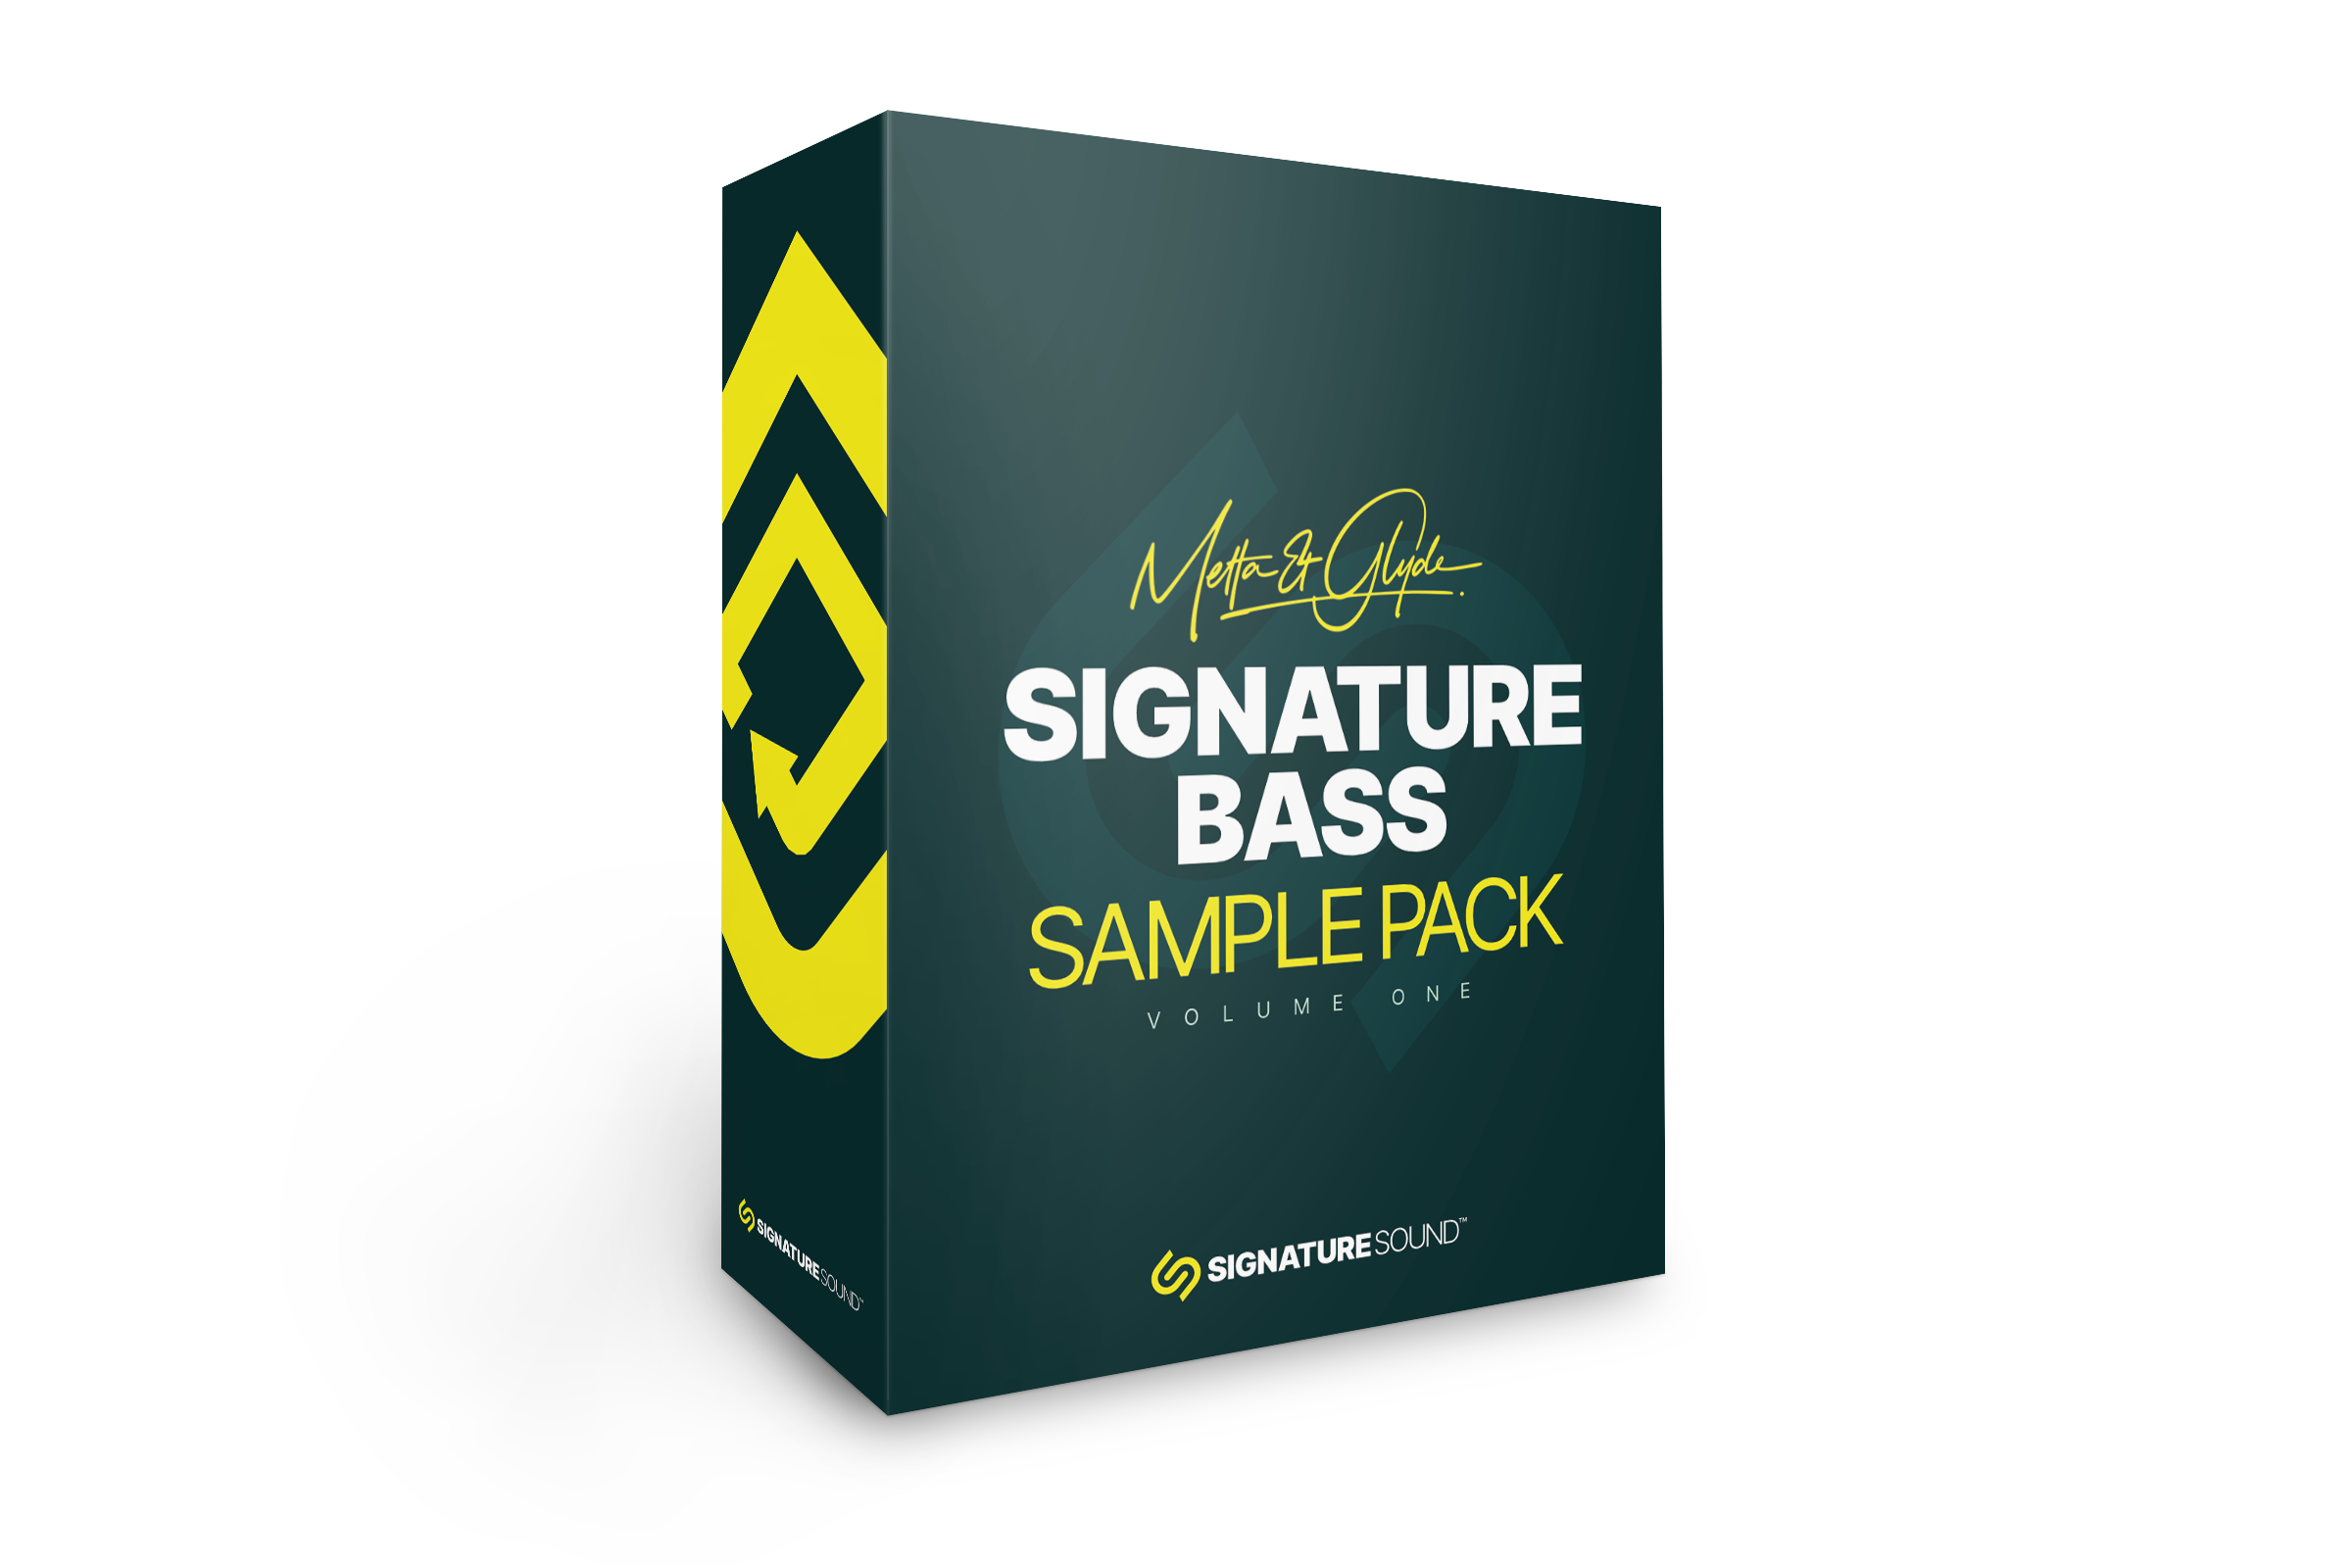 Metta and Glyde Signature Bass [Sample Pack] Volume One